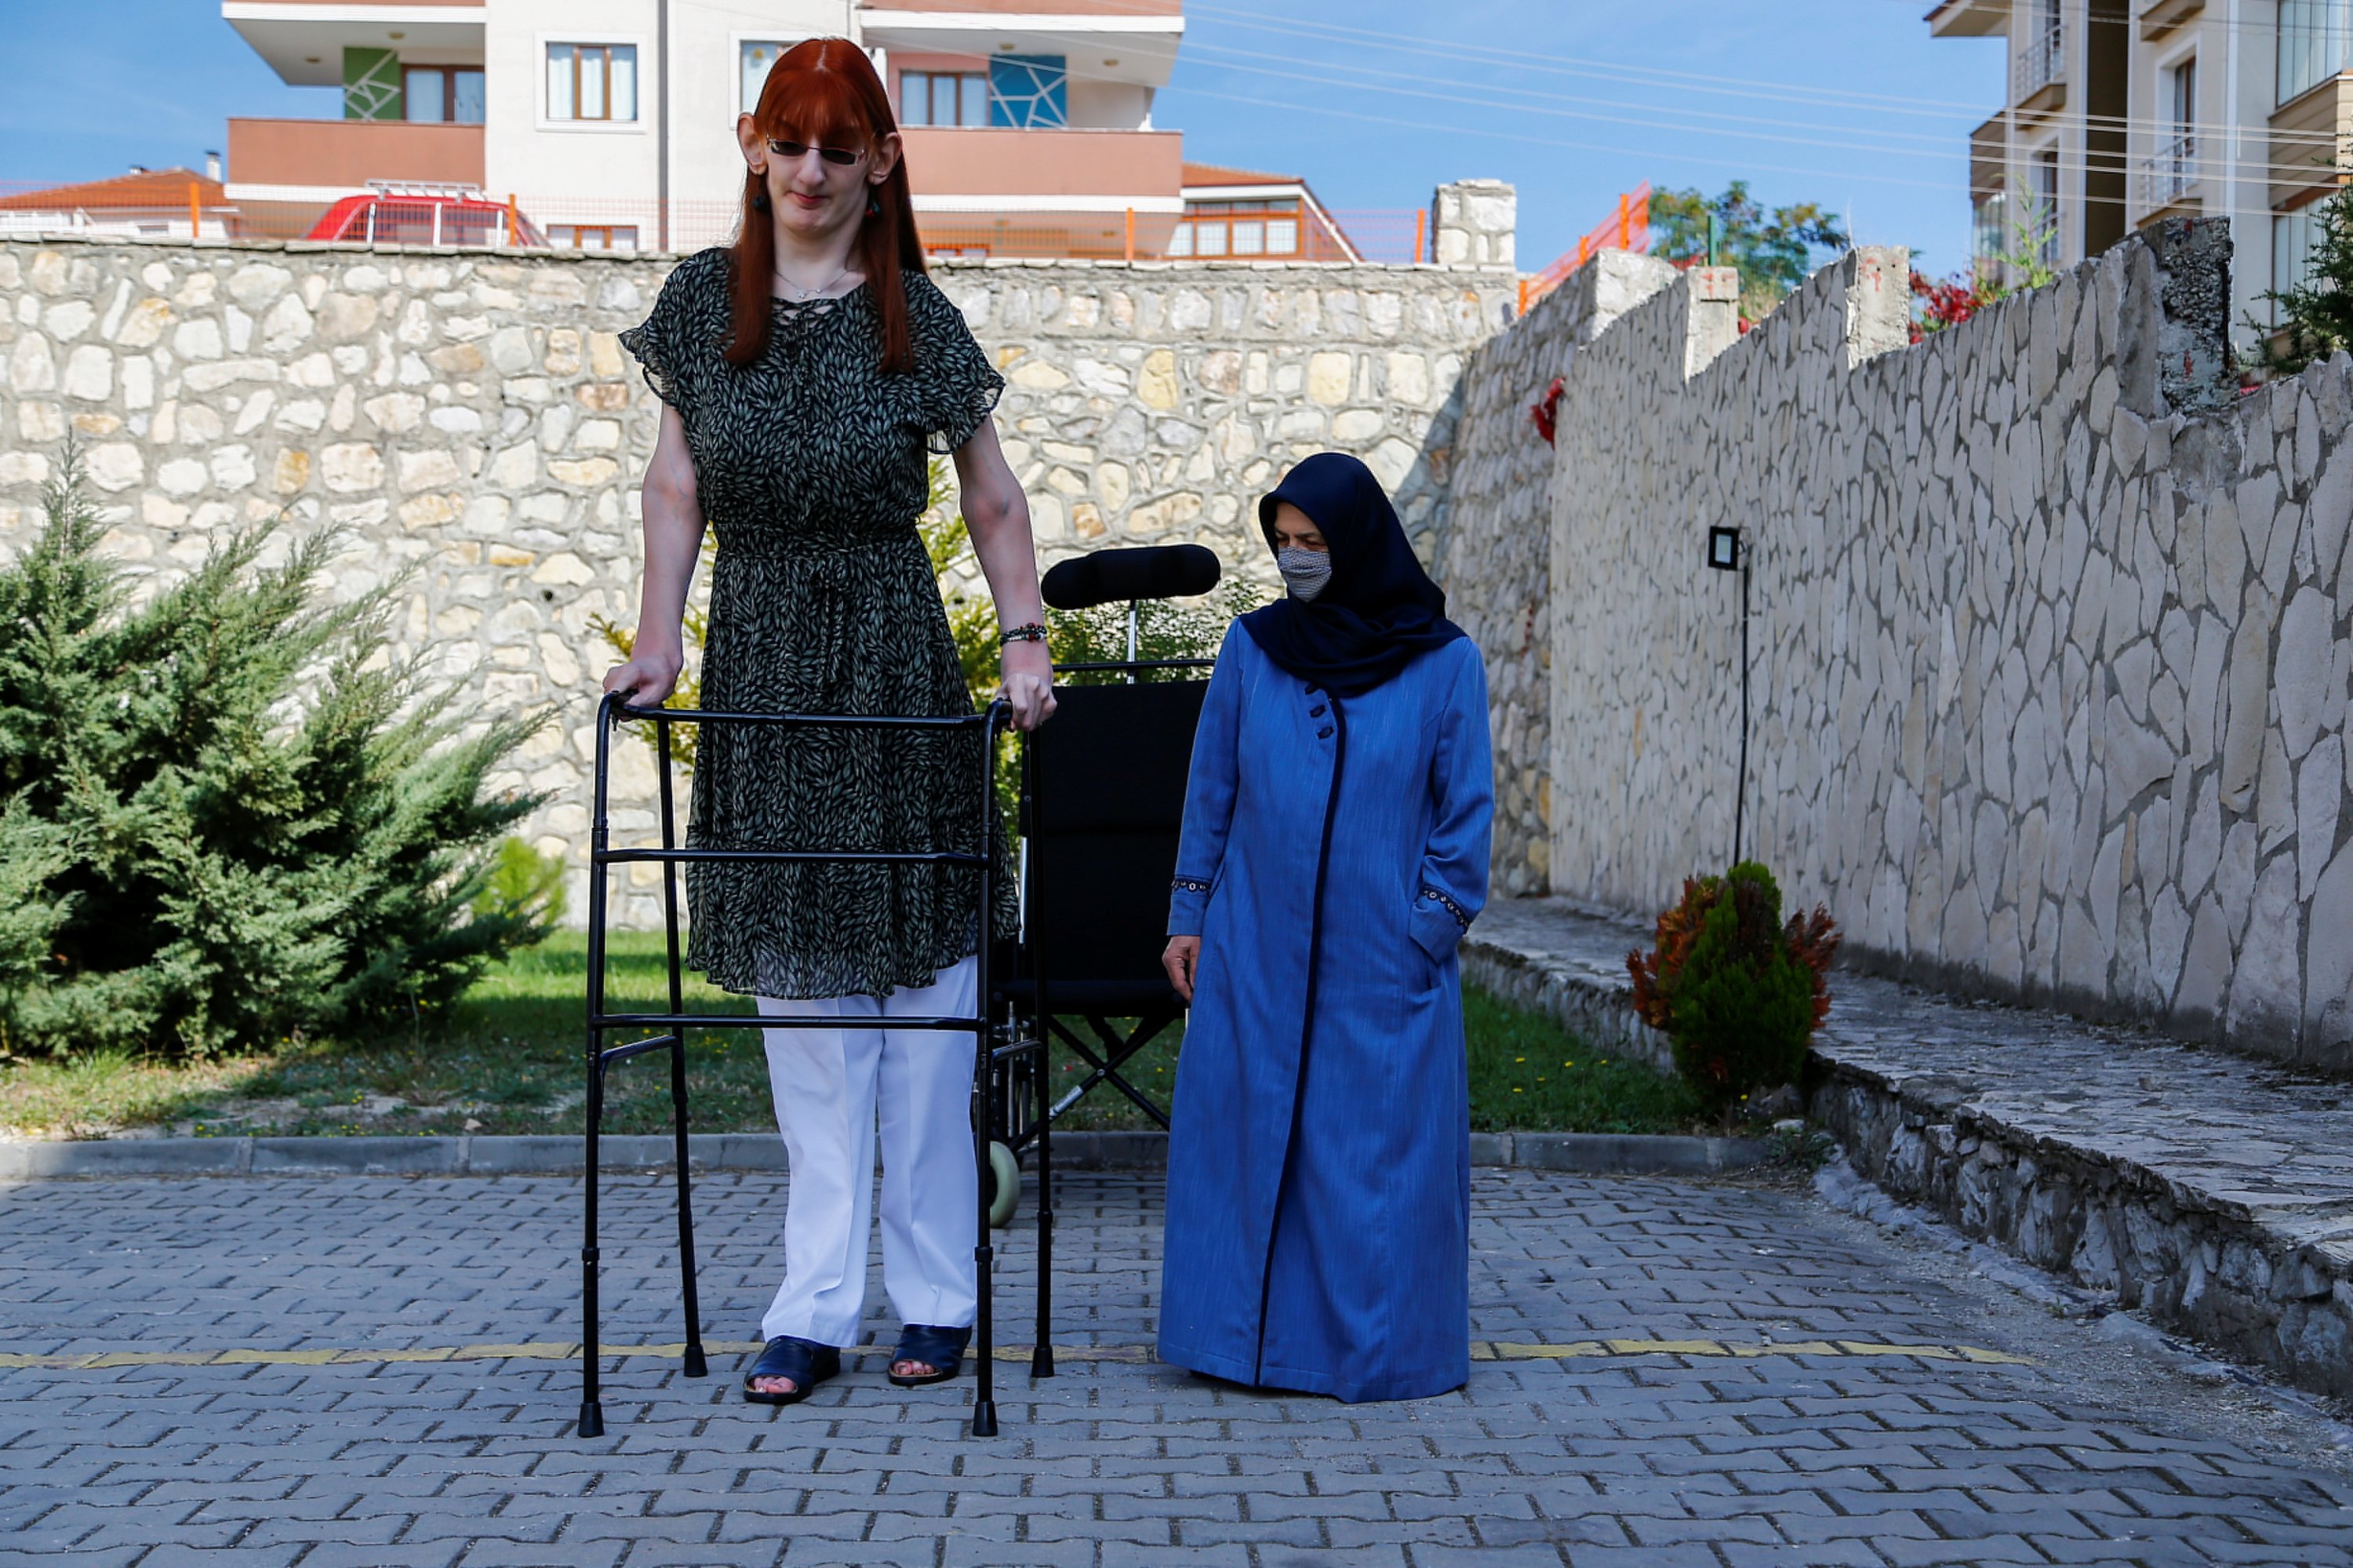 World's tallest woman Rumeysa says it's OK to stand out | Daily Sabah